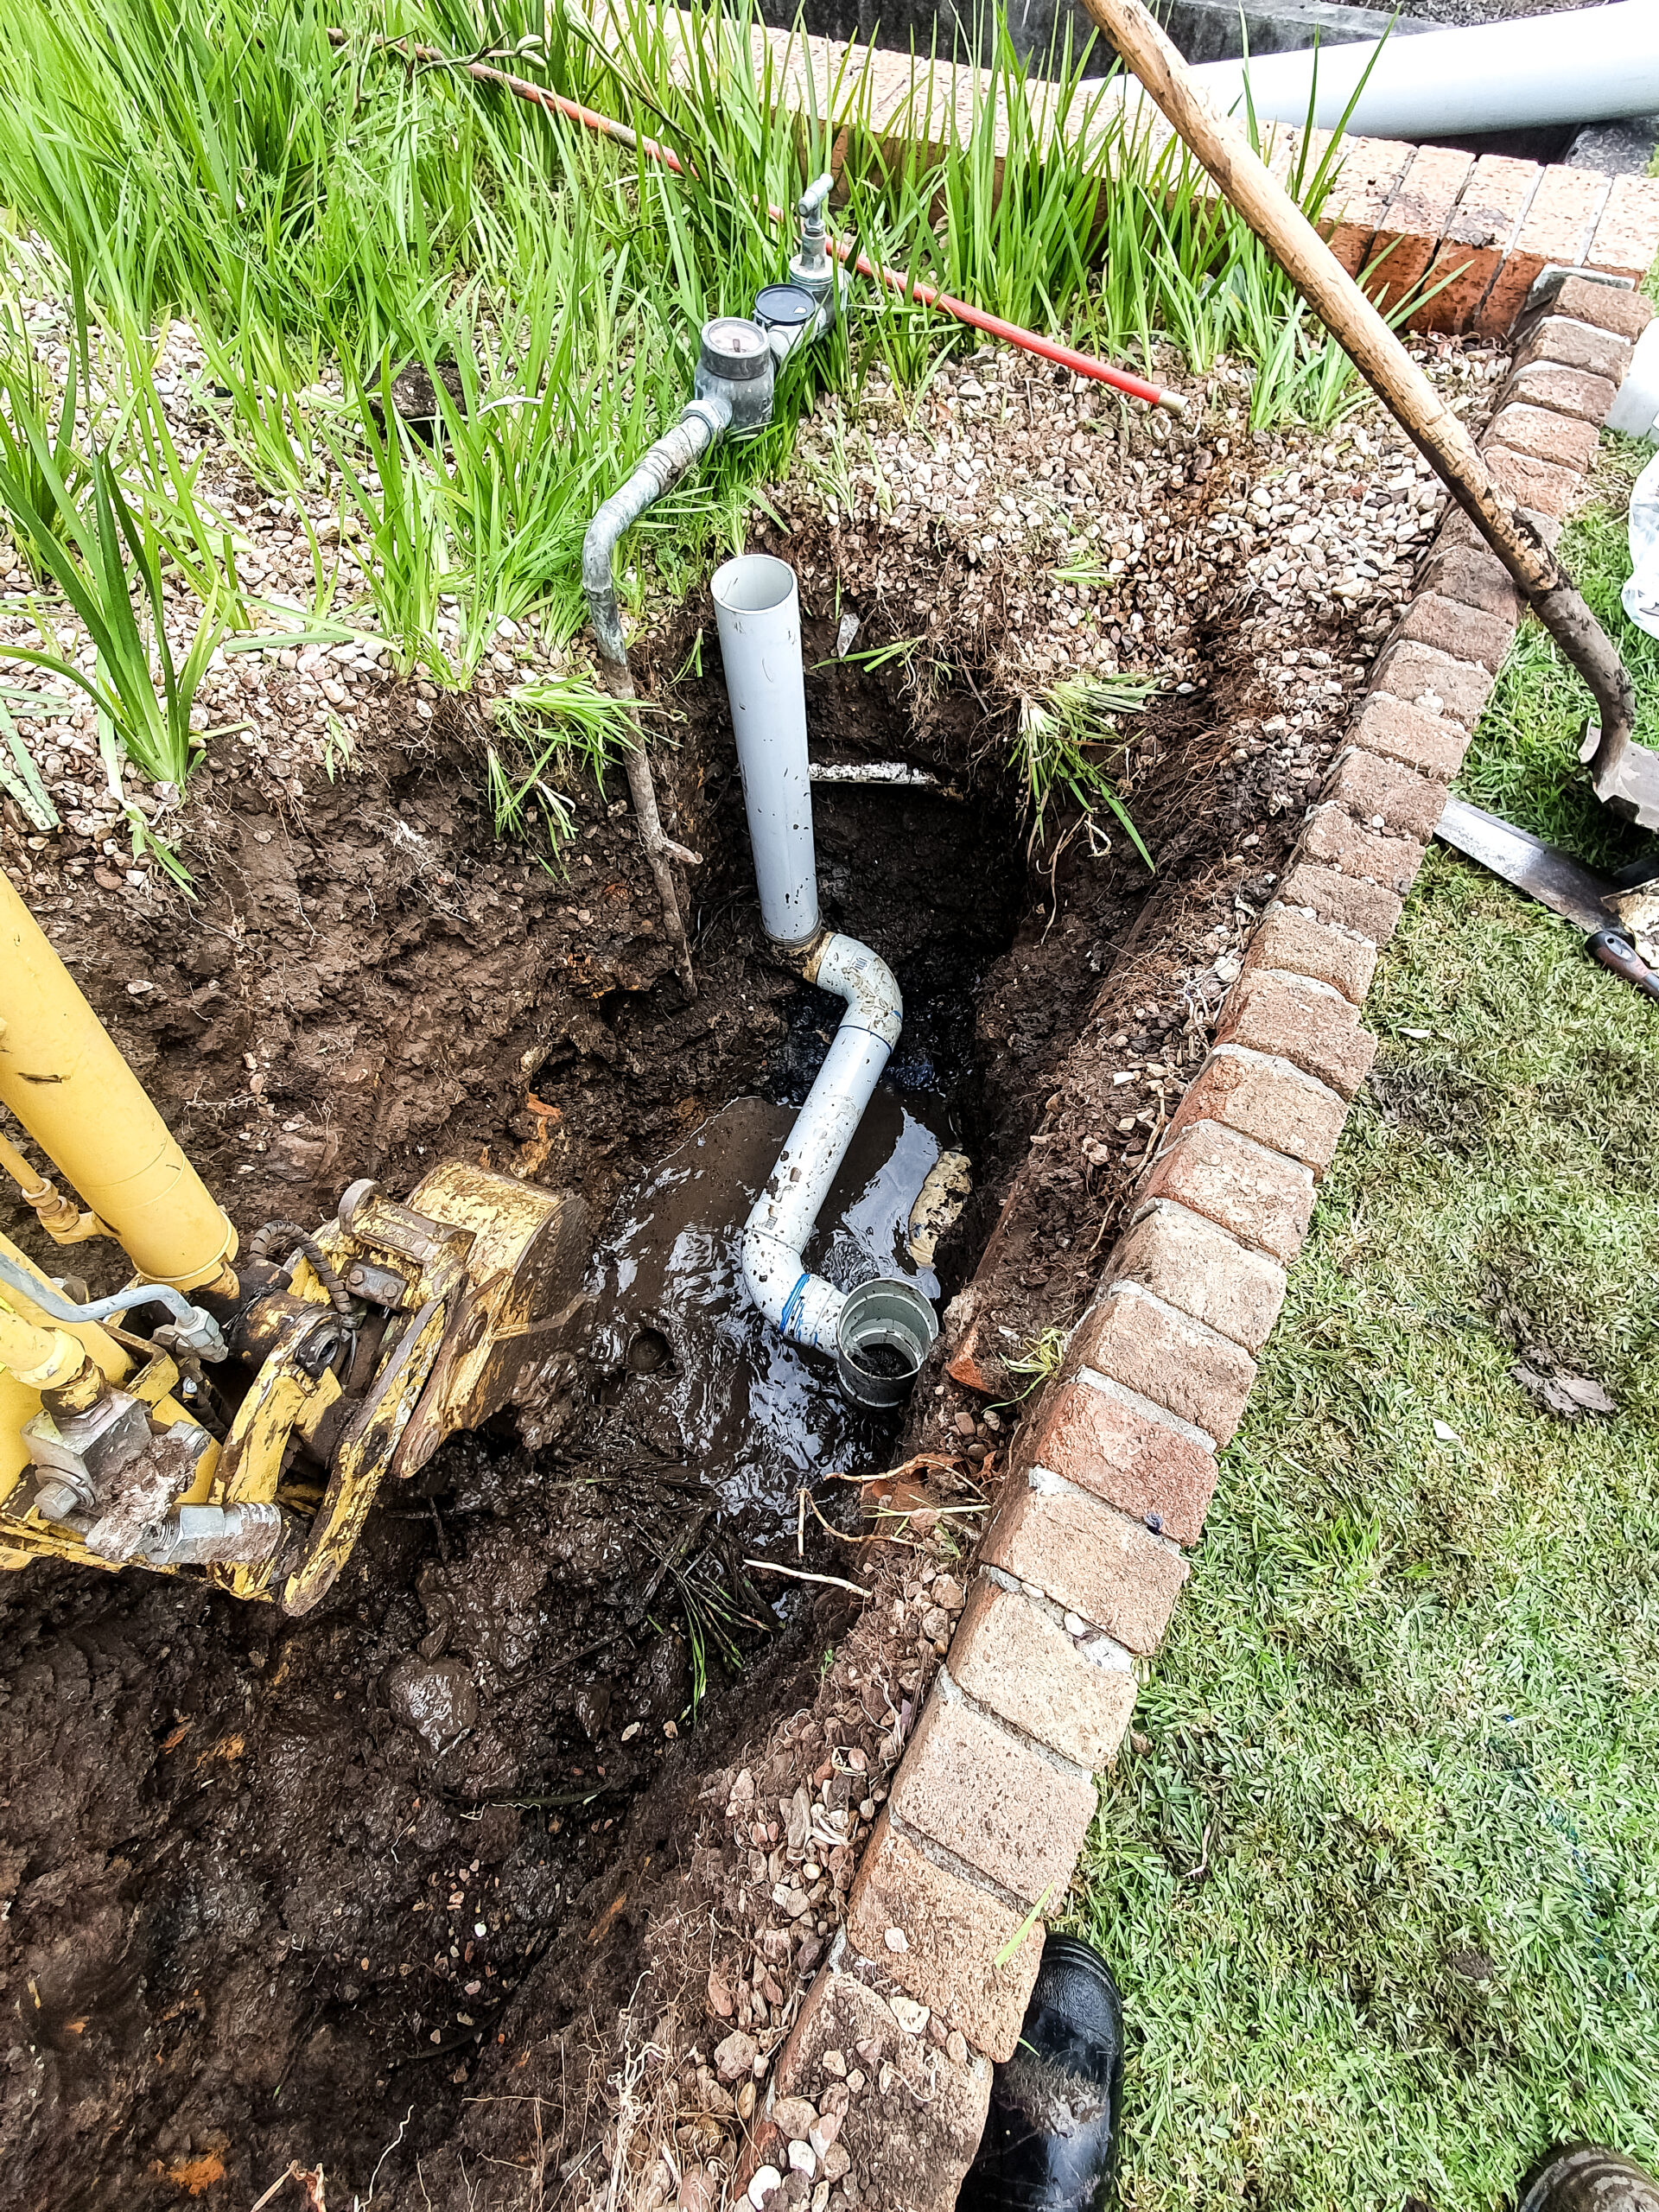 Water leak service offered by Illawarra plumbing and drainer